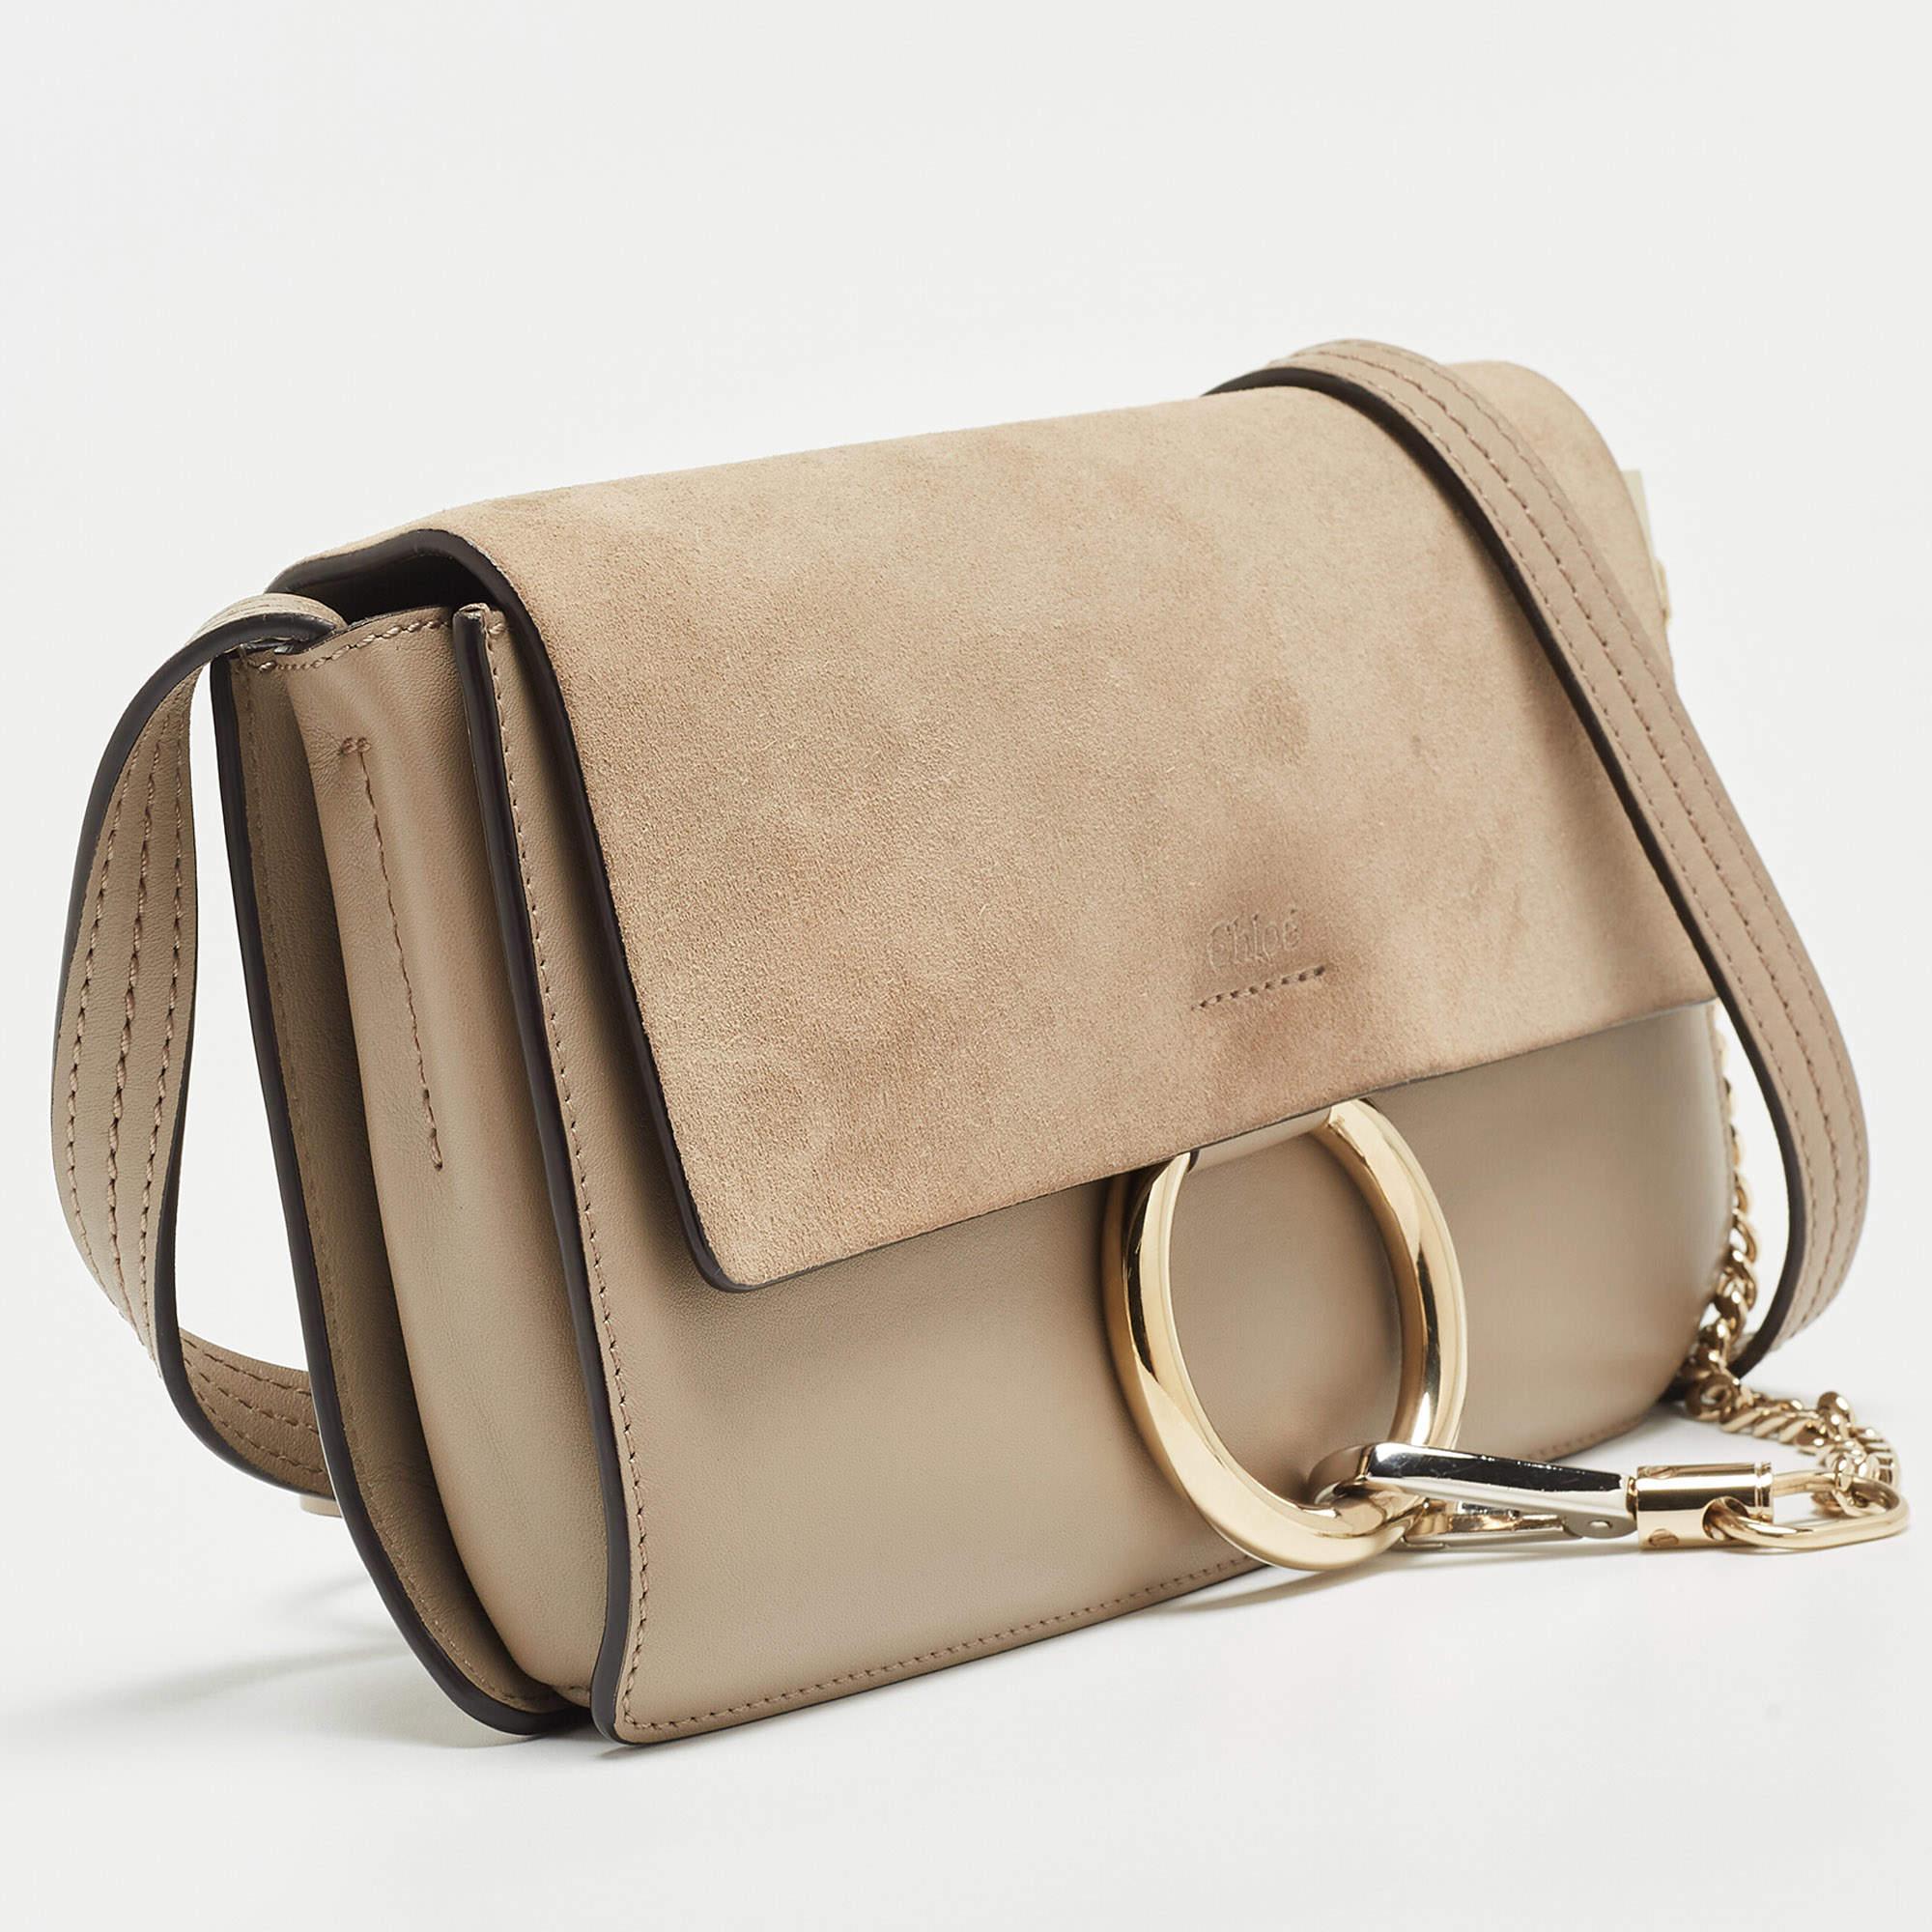 You are going to love owning this Faye shoulder bag from Chloe as it is well-made and brimming with luxury. The bag has been crafted from leather and designed with a suede flap that has a chain detail and a well-sized interior to store all your